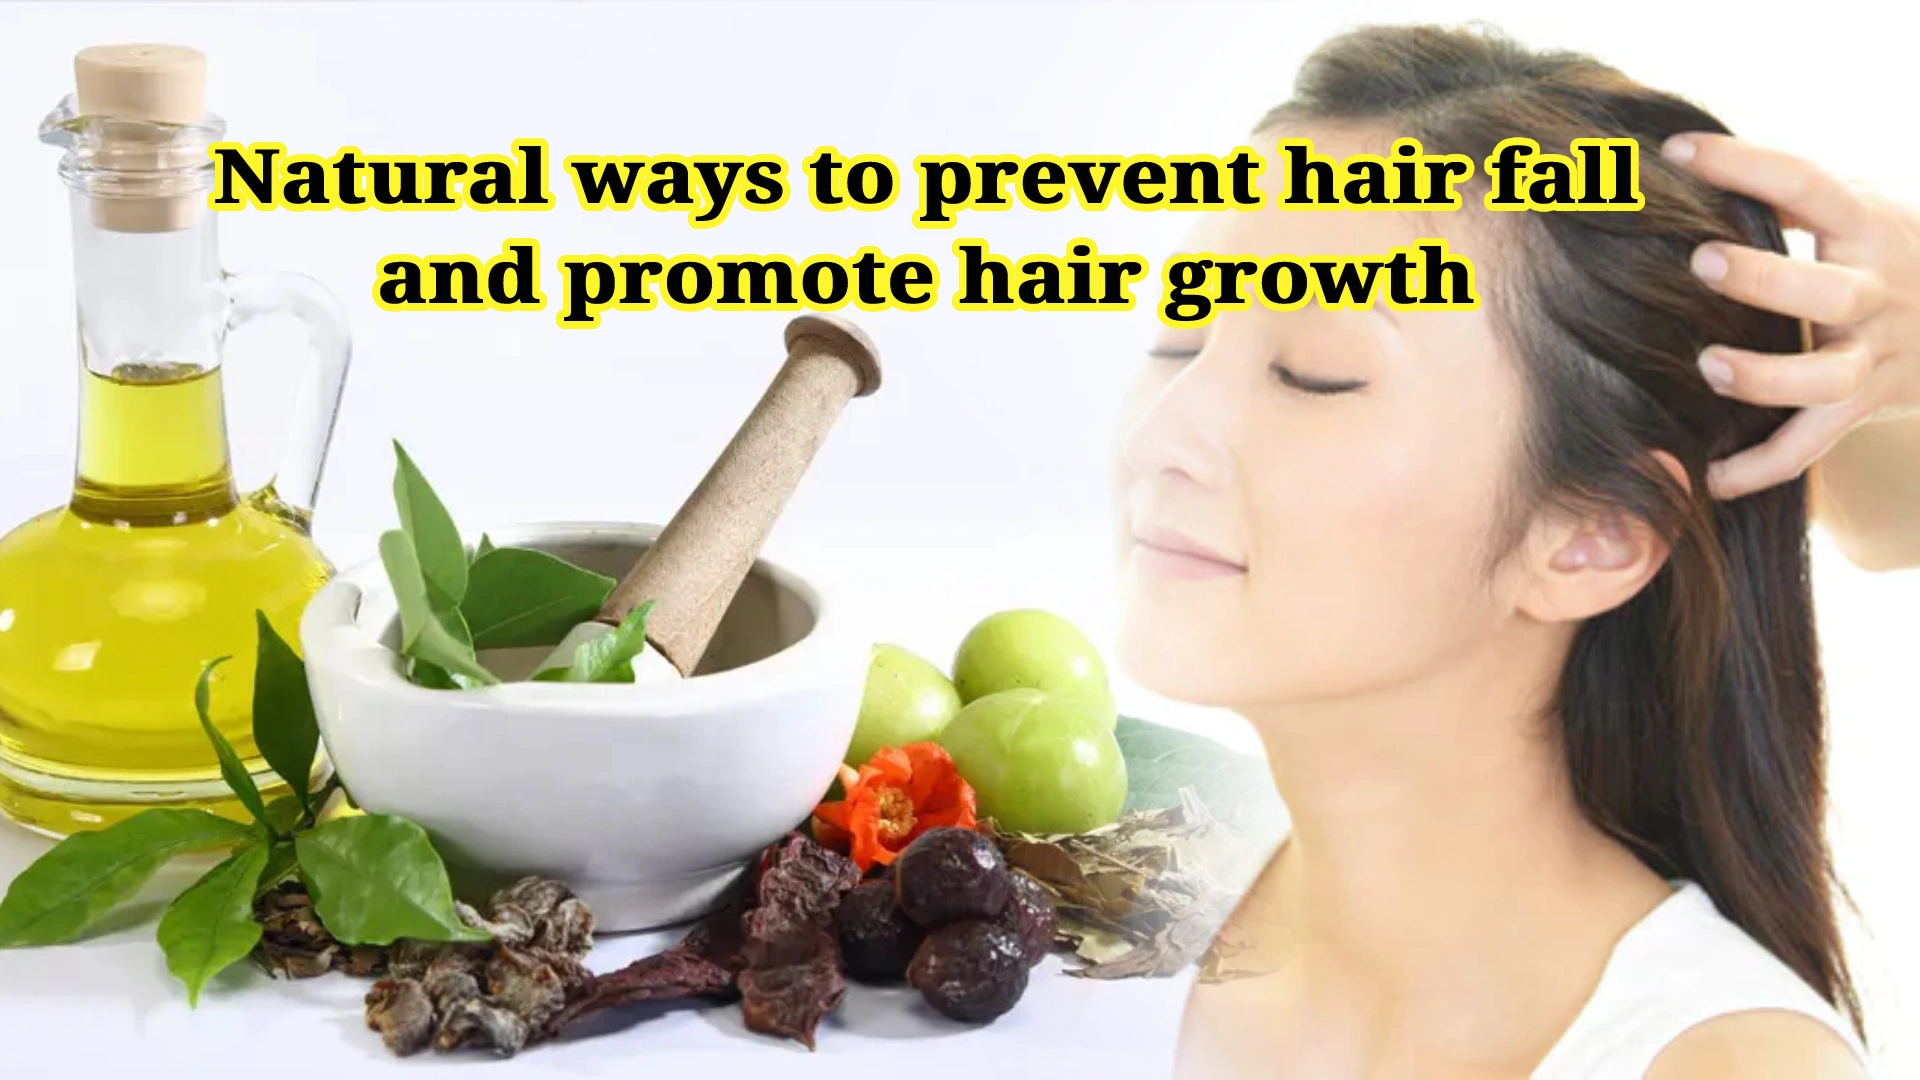 12 Simple Home Remedies to Control Hair Fall